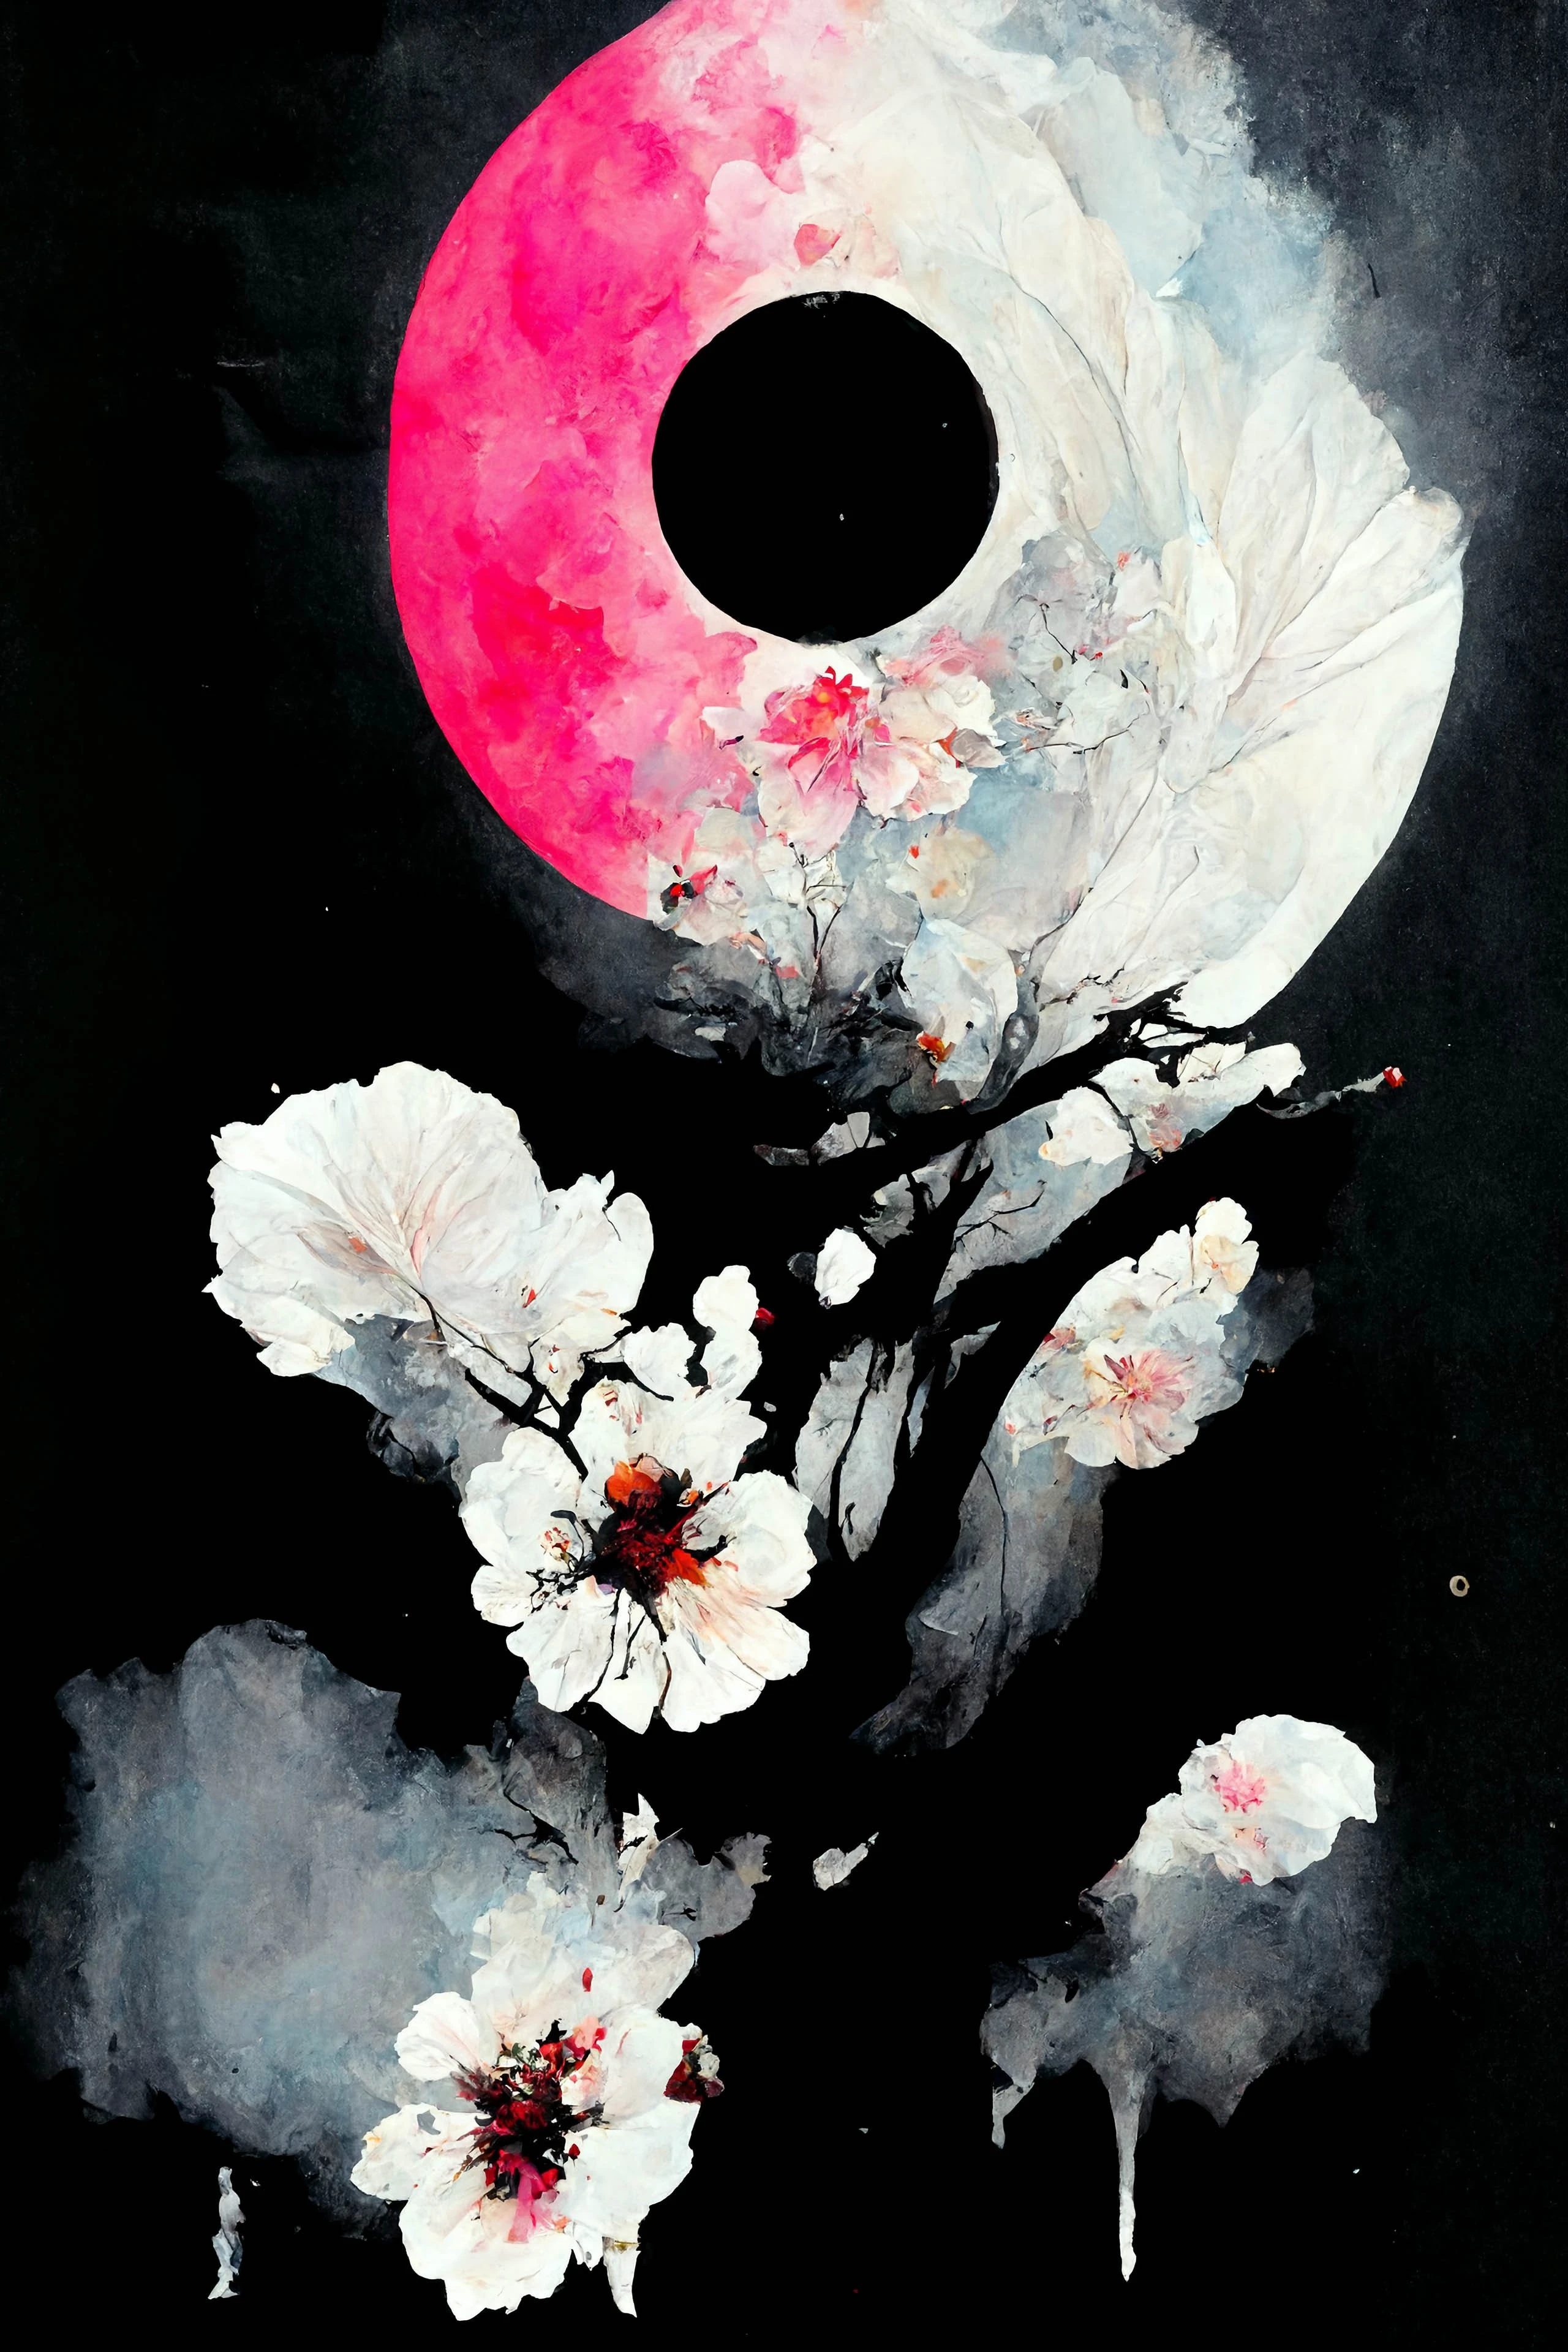 [Midjourney] Cherry Blossoms Crazy Abstract Sad moon [Realistic]